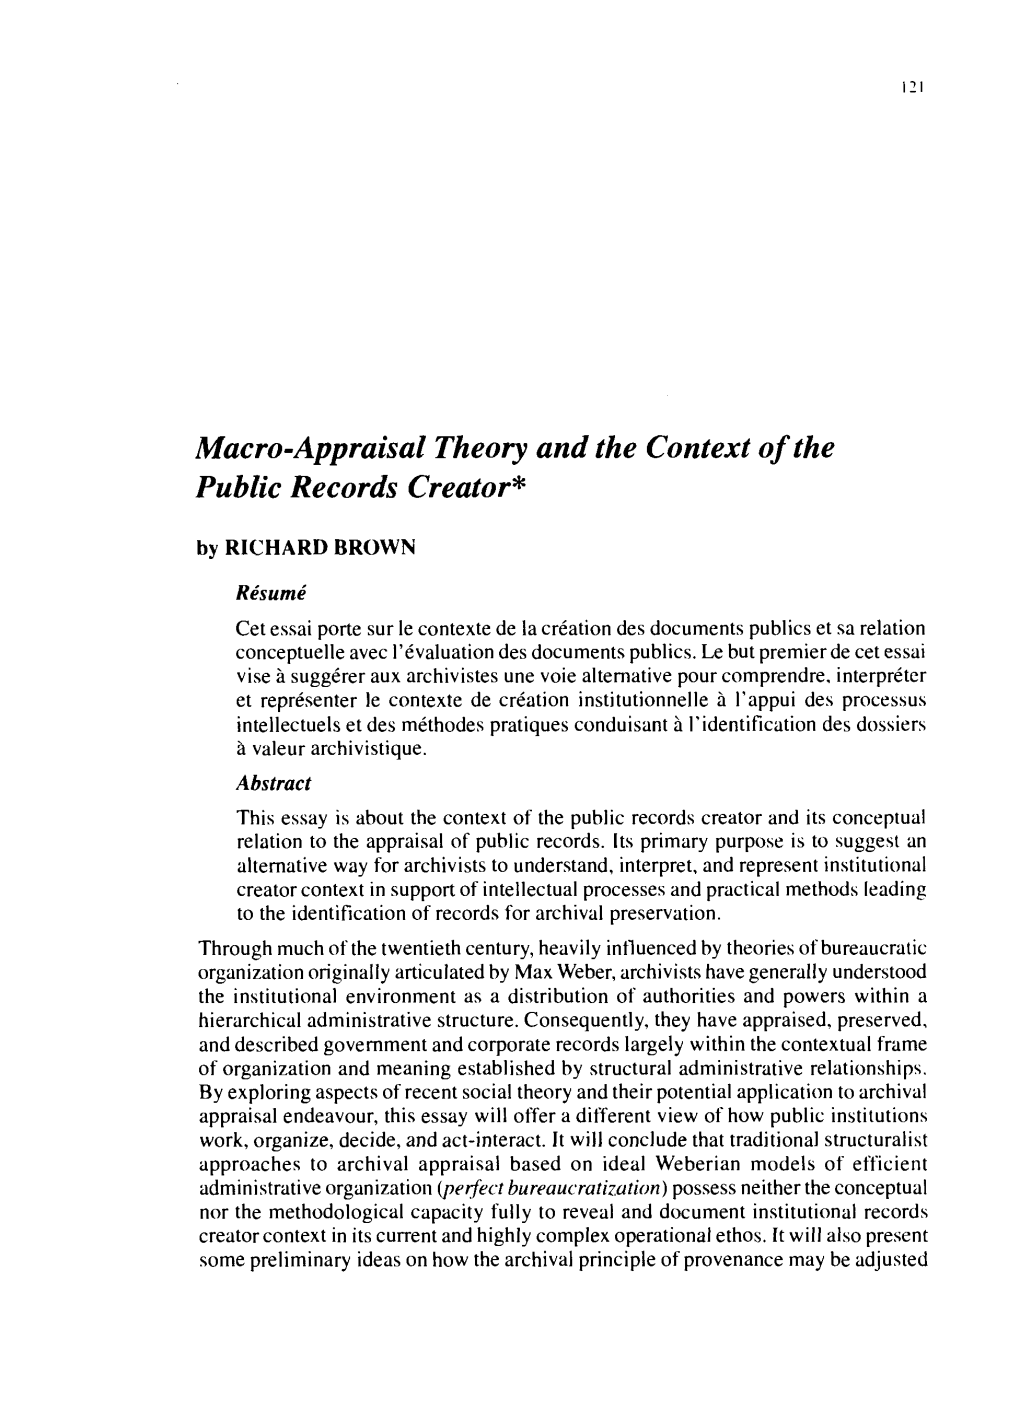 Macro-Appraisal Theory and the Context of the Public Records Creator* by RICHARD BROWN